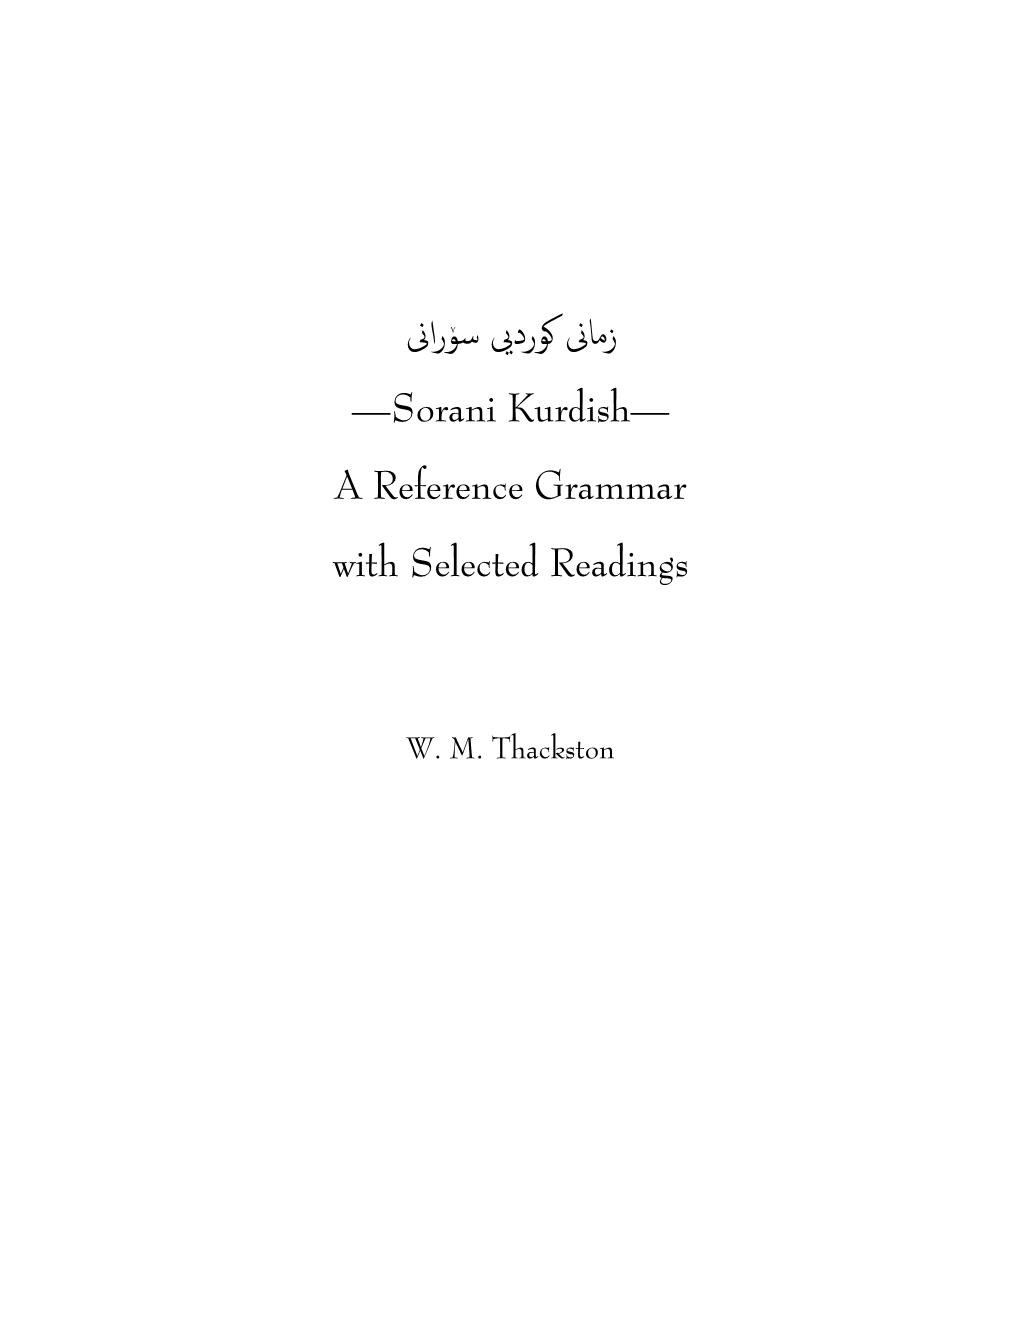 Sorani Kurdish: a Reference Grammar with Selected Reading